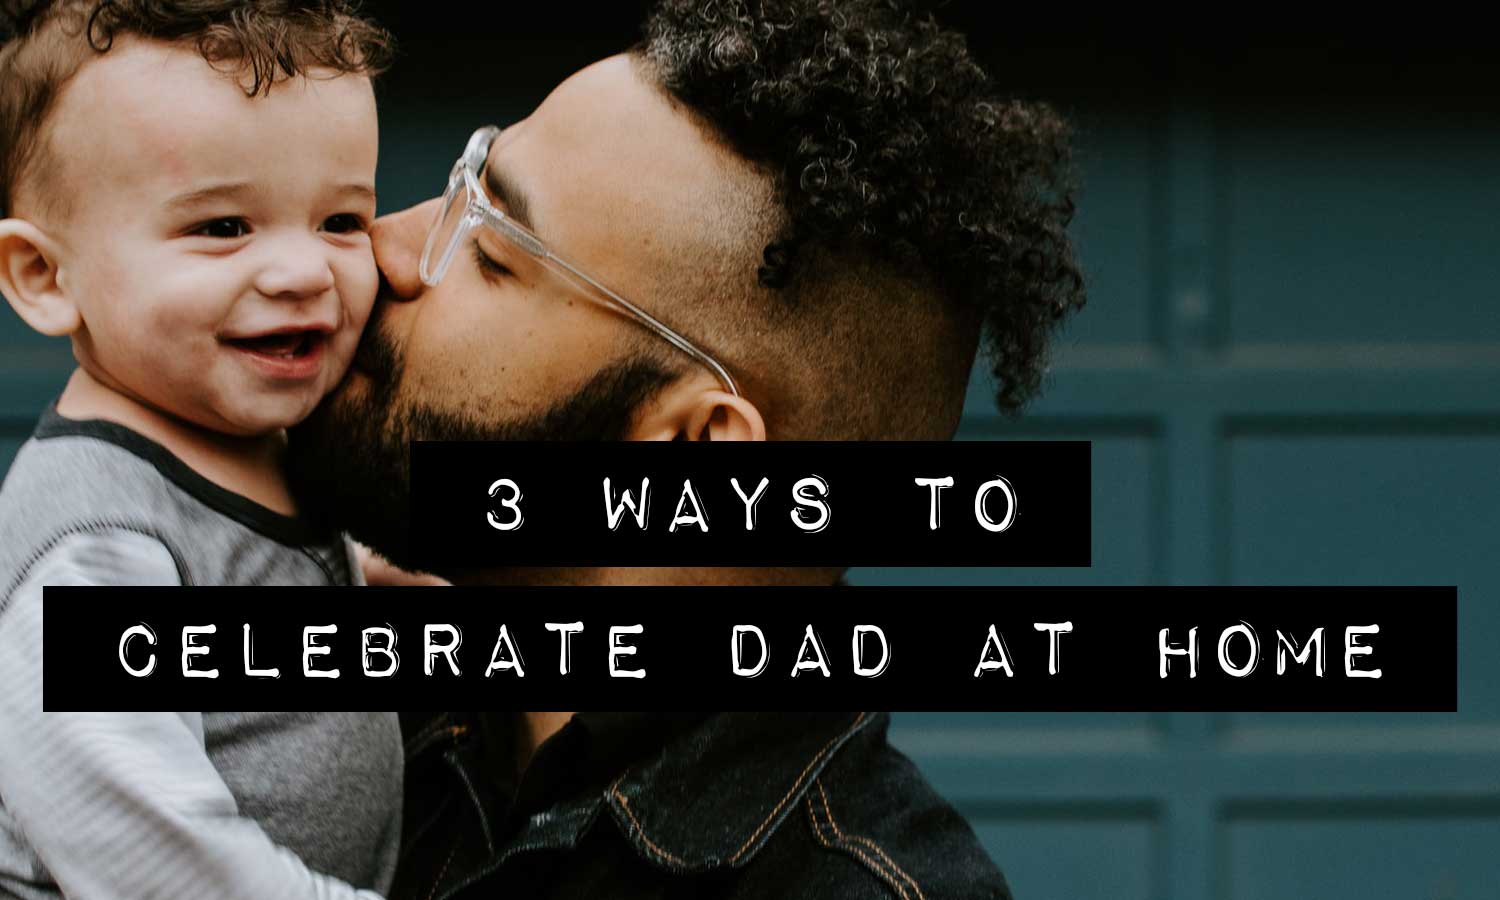 3 Ways to Celebrate Dad at Home